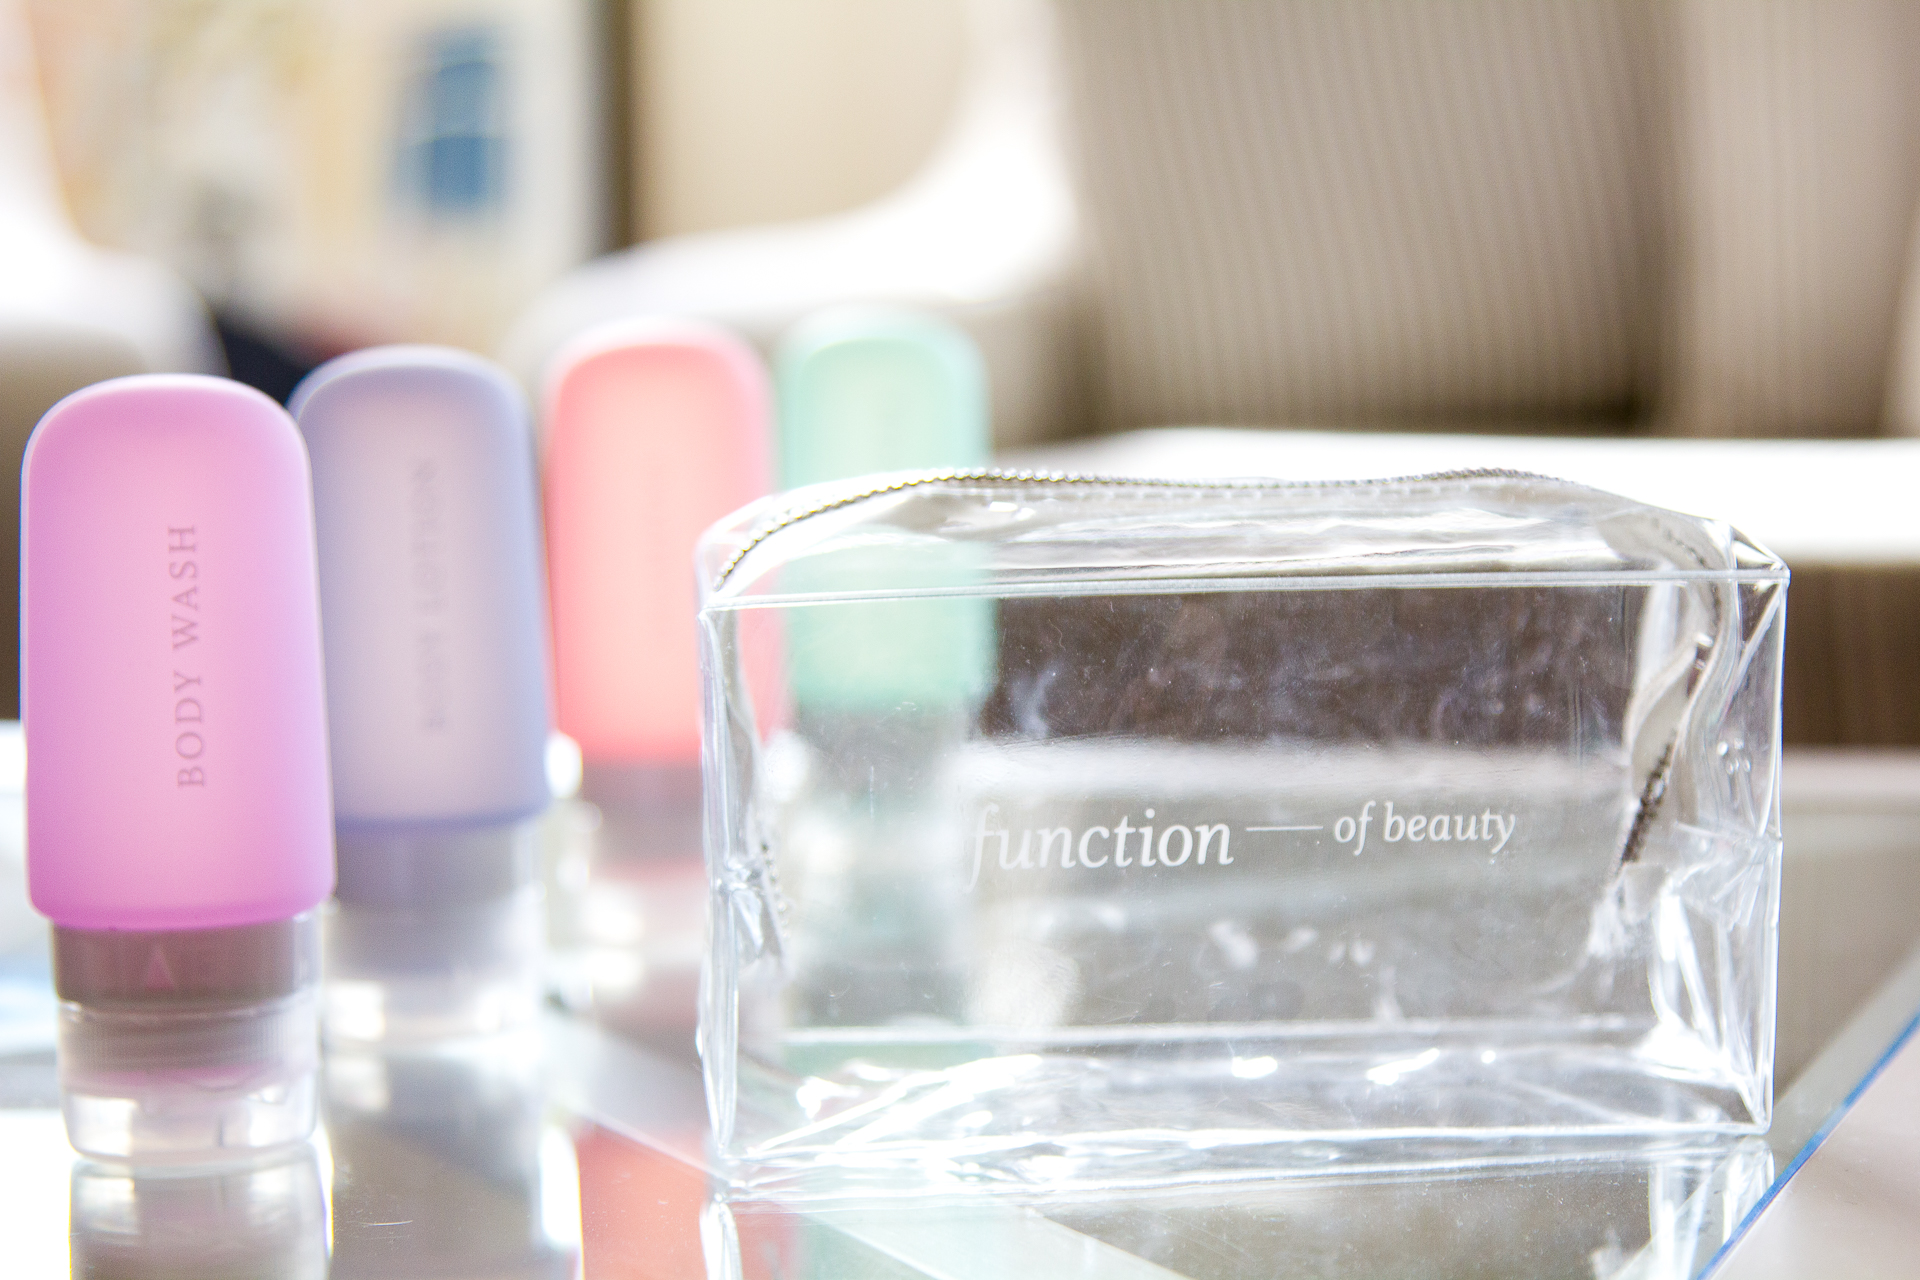 Function of Beauty bag